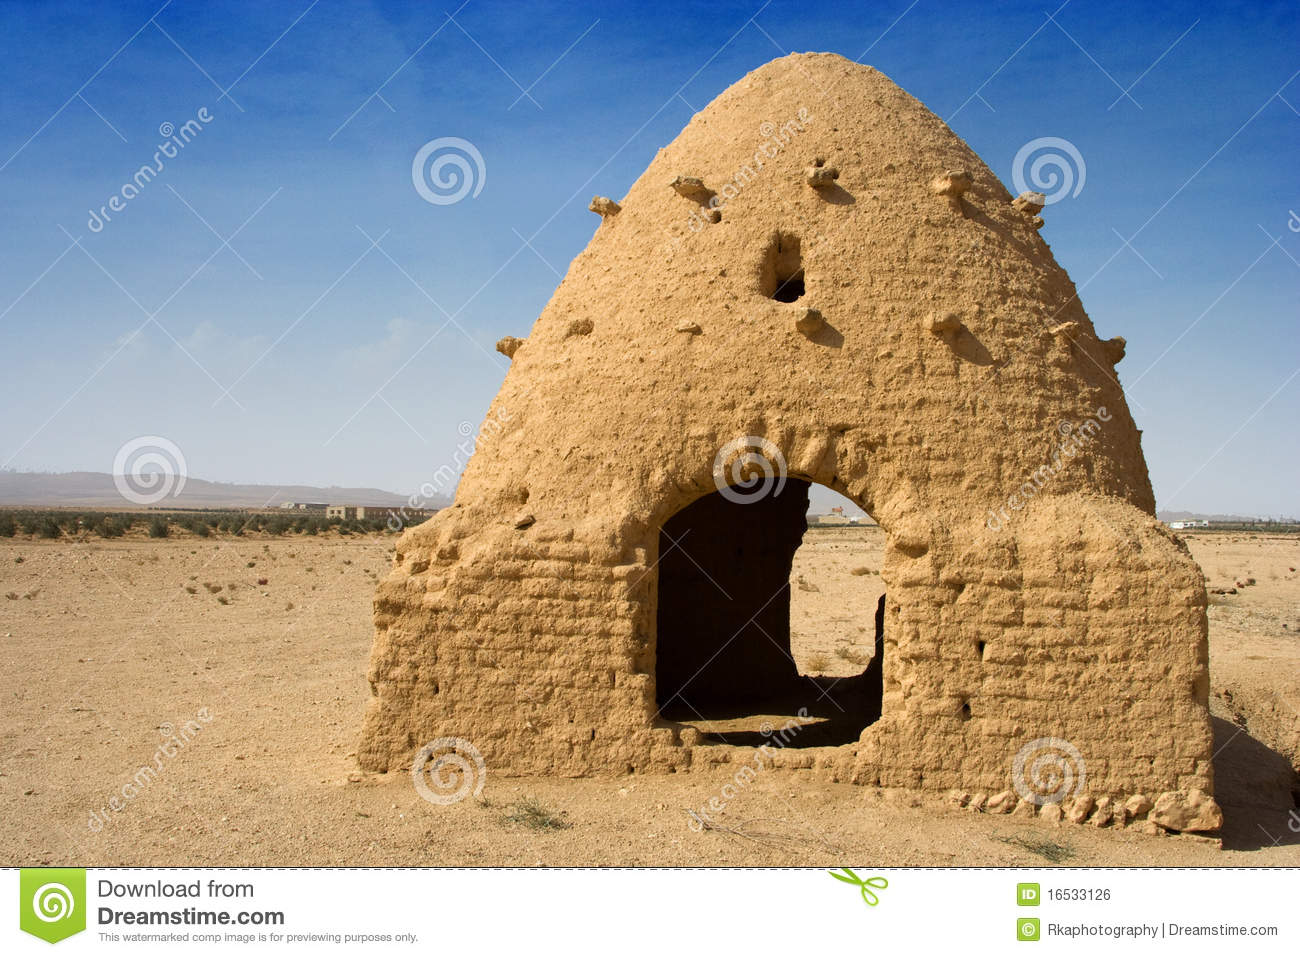 These Traditional Mud Brick Houses Are Still Used In Some Areas Of    